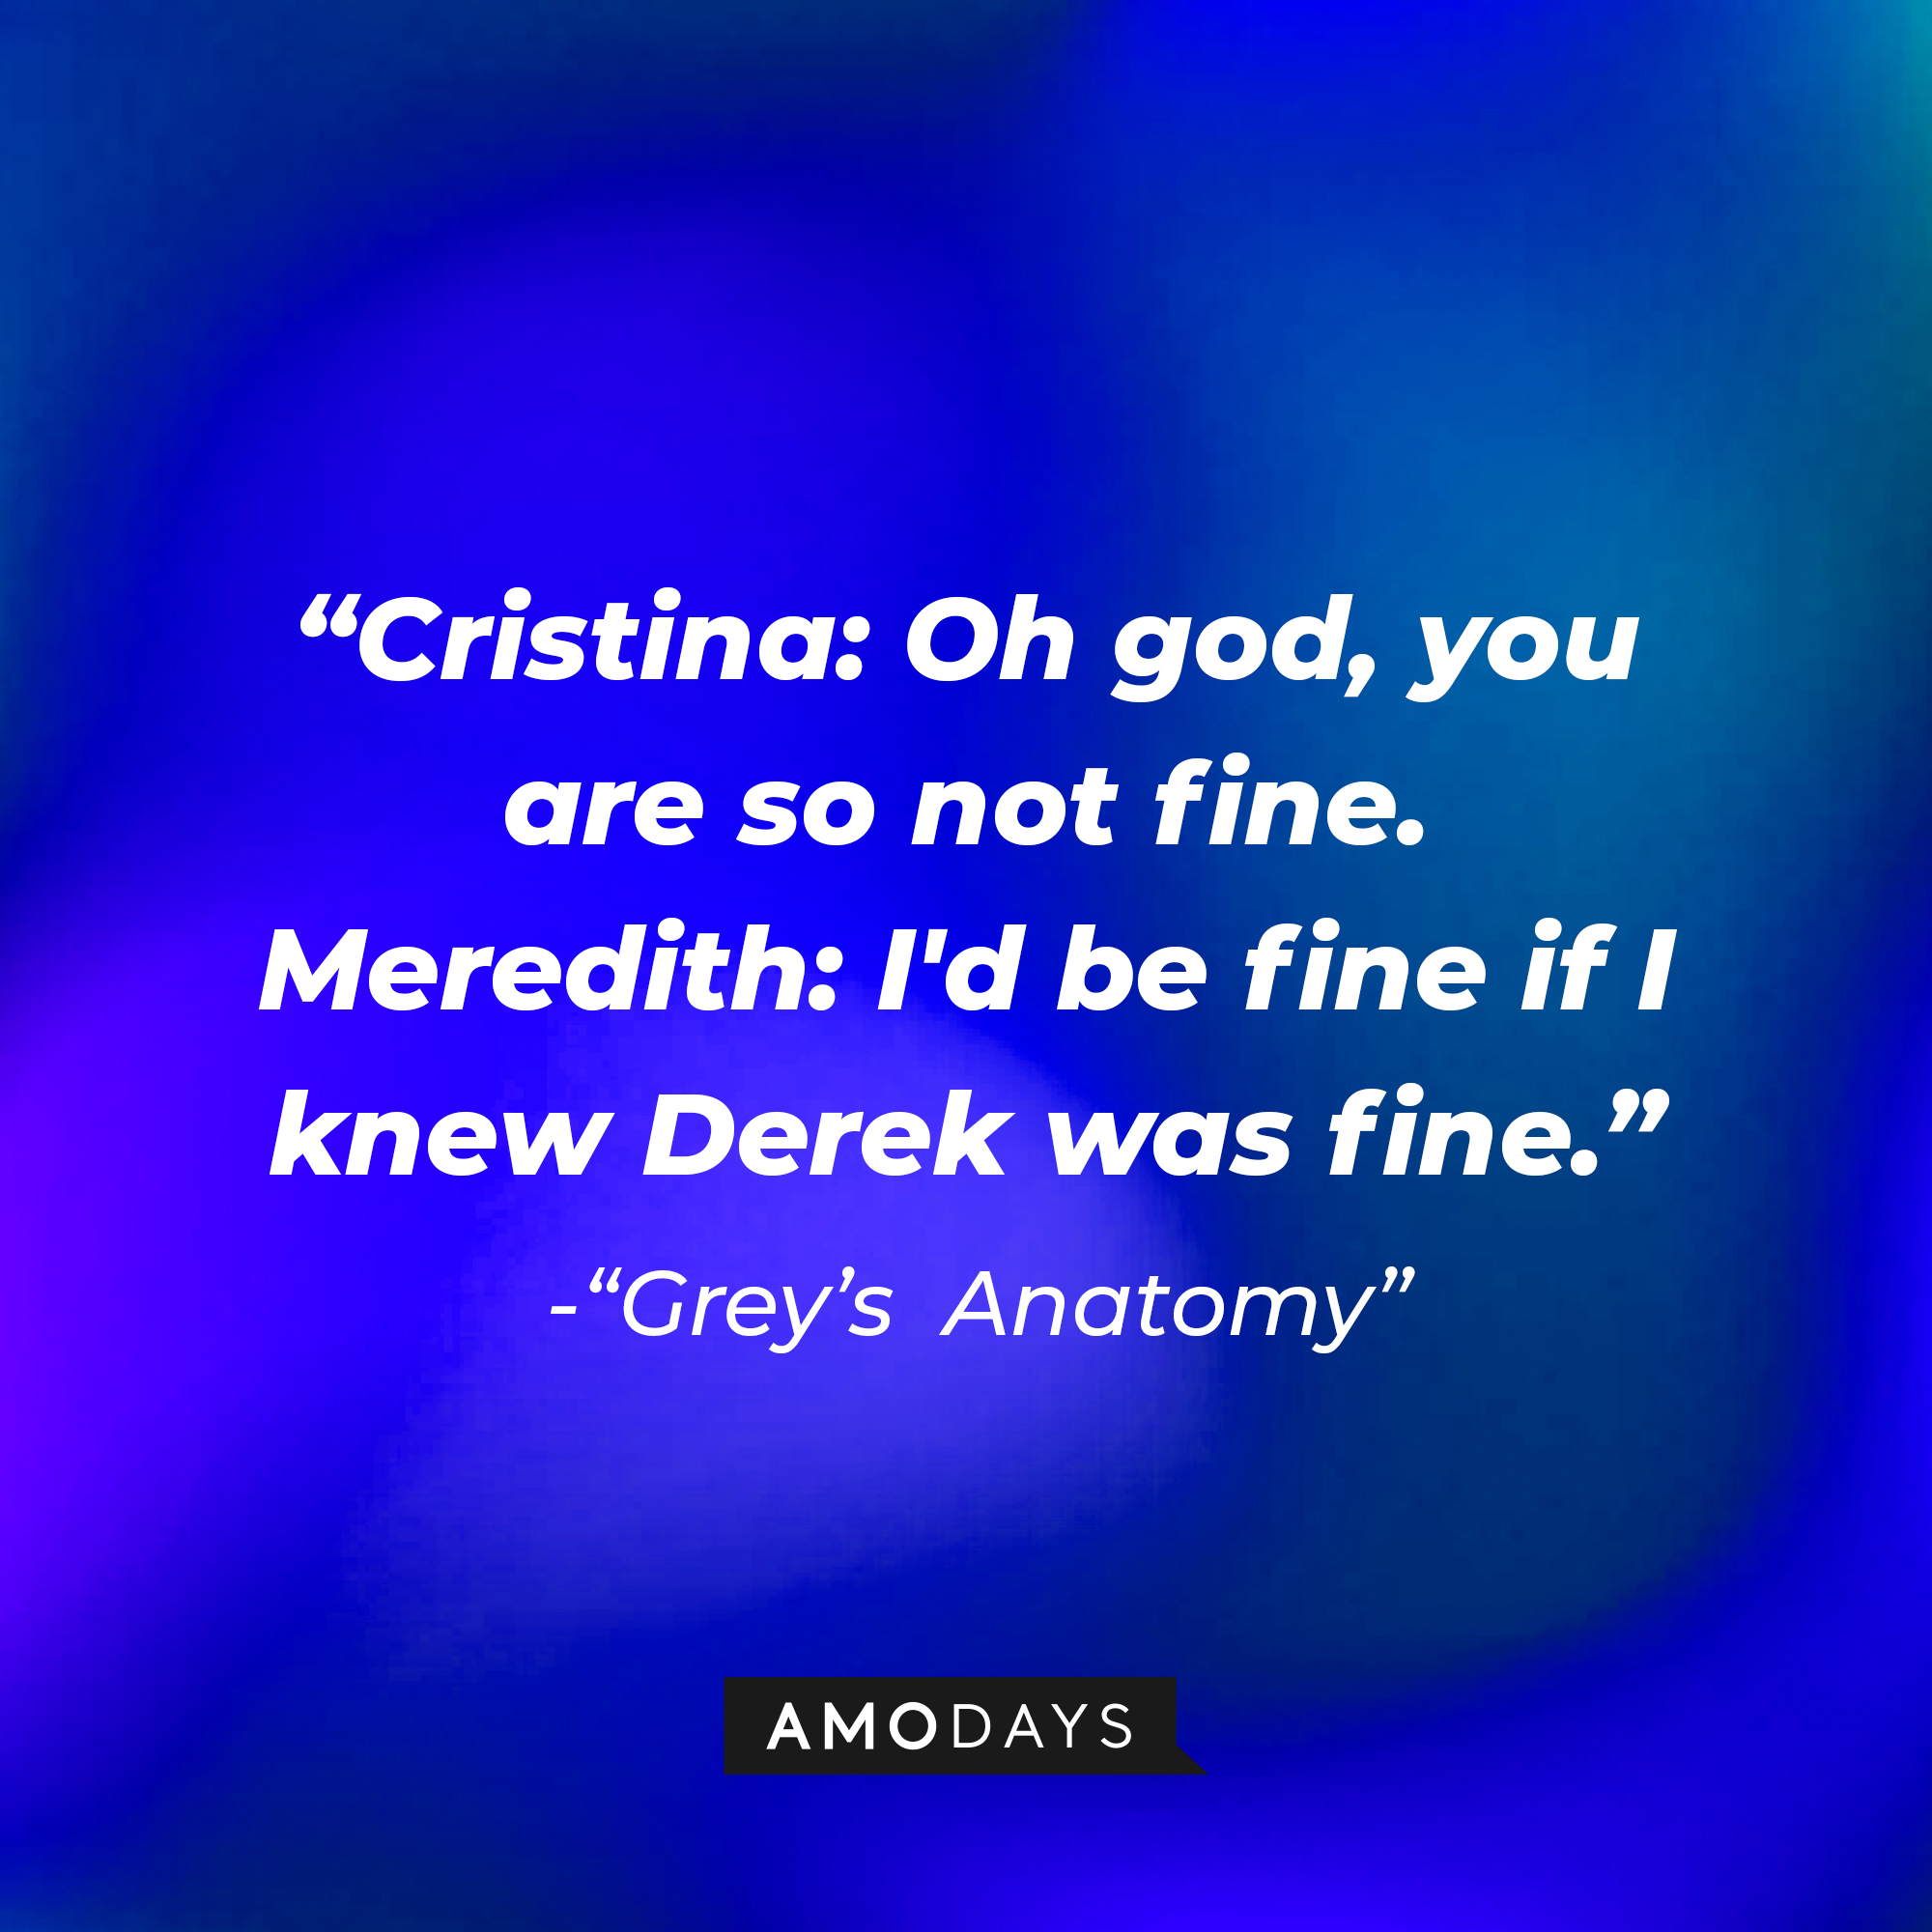 Cristina's quote: "Oh god, you are so not fine." Meredith: "I'd be fine if I knew Derek was fine." | Image: Amodays